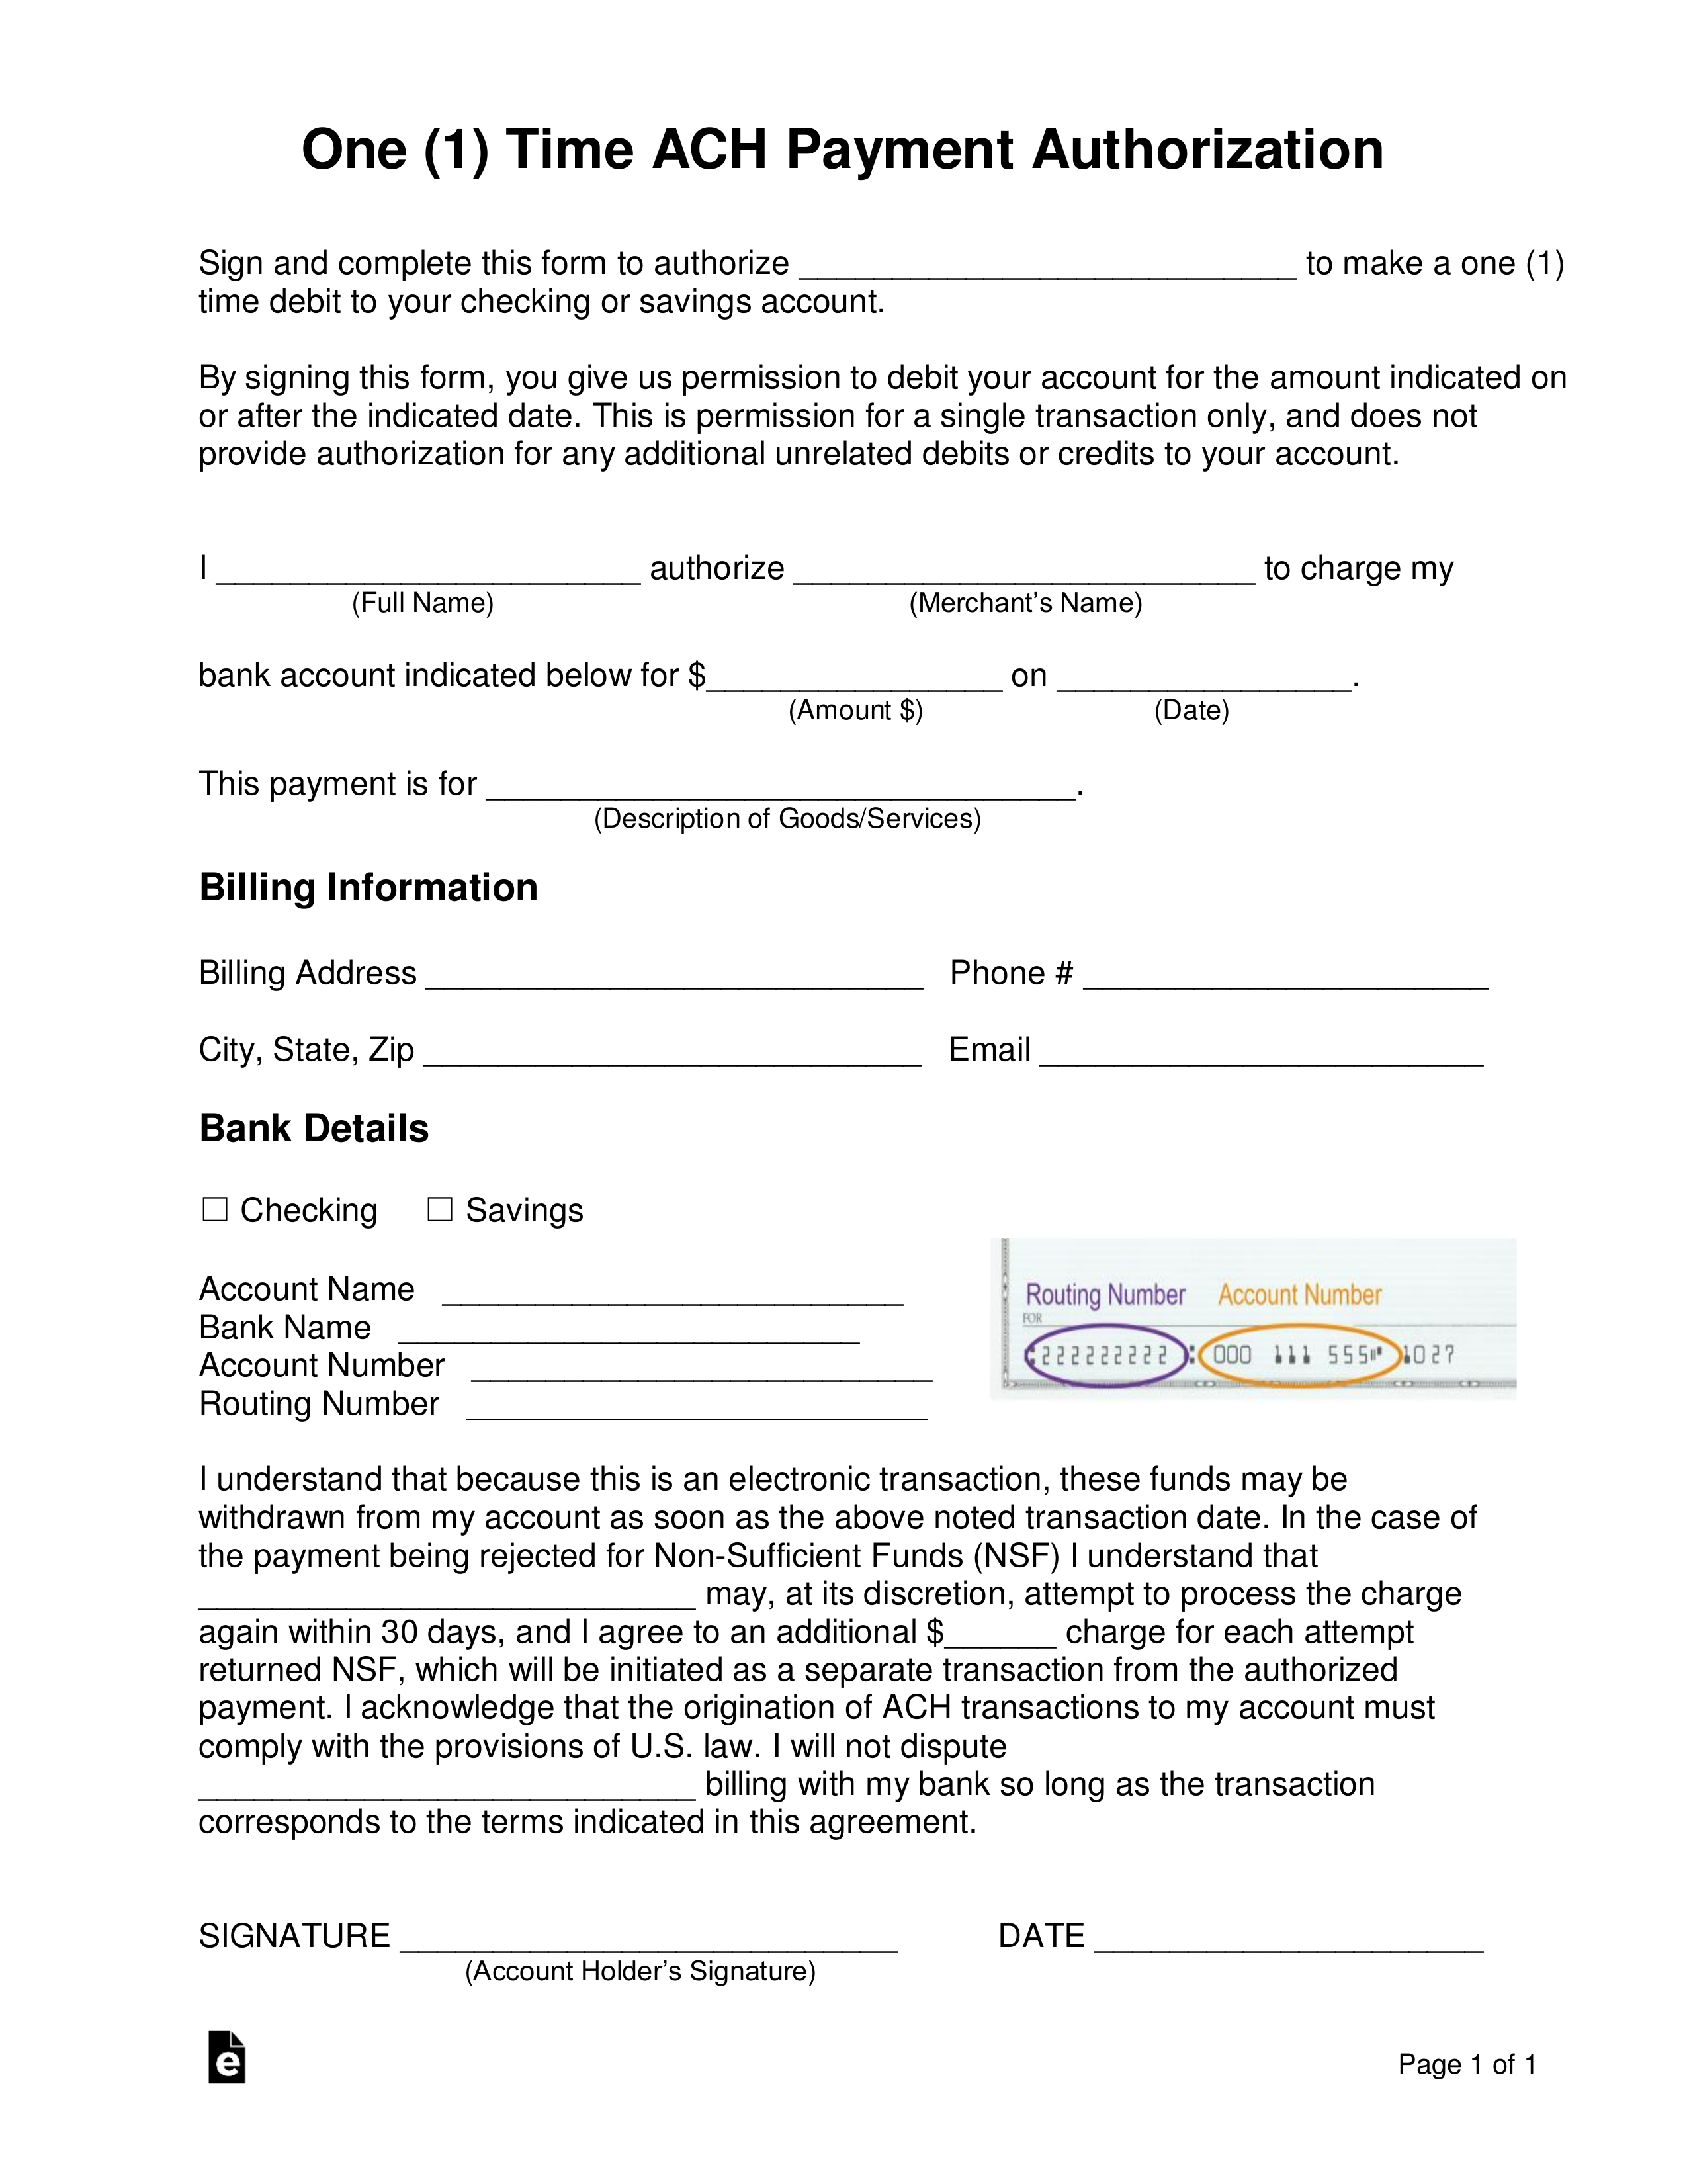 Free One 1 Time ACH Payment Authorization Form PDF Word EForms